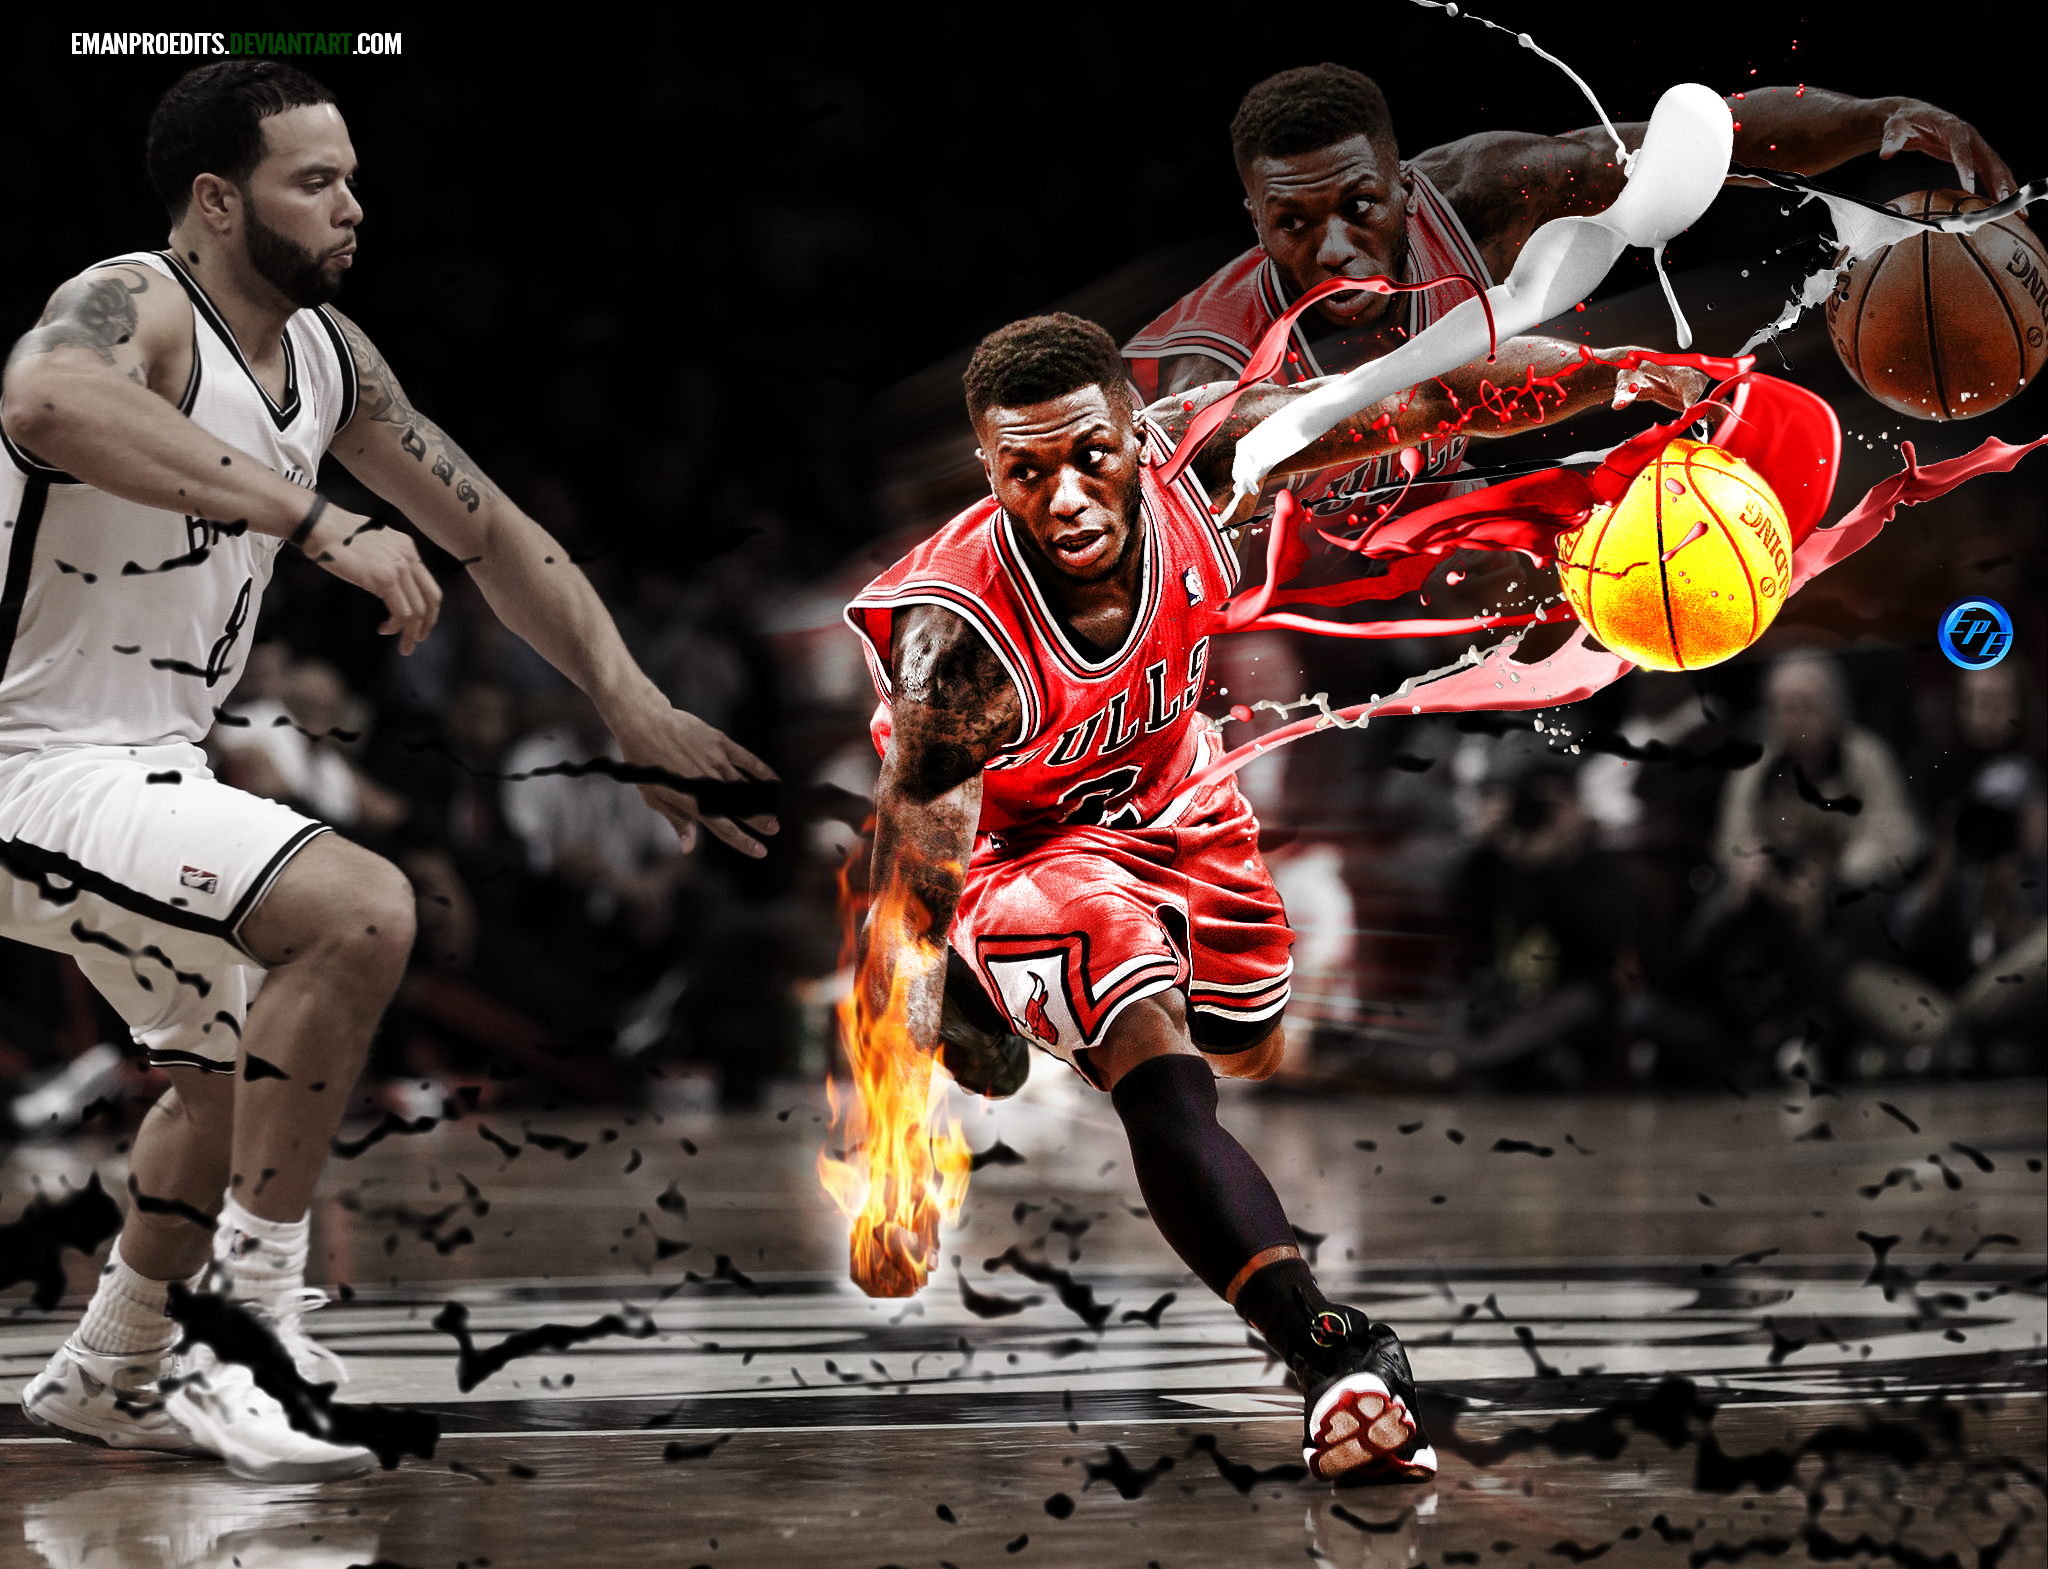 Nate Robinson Wallpapers